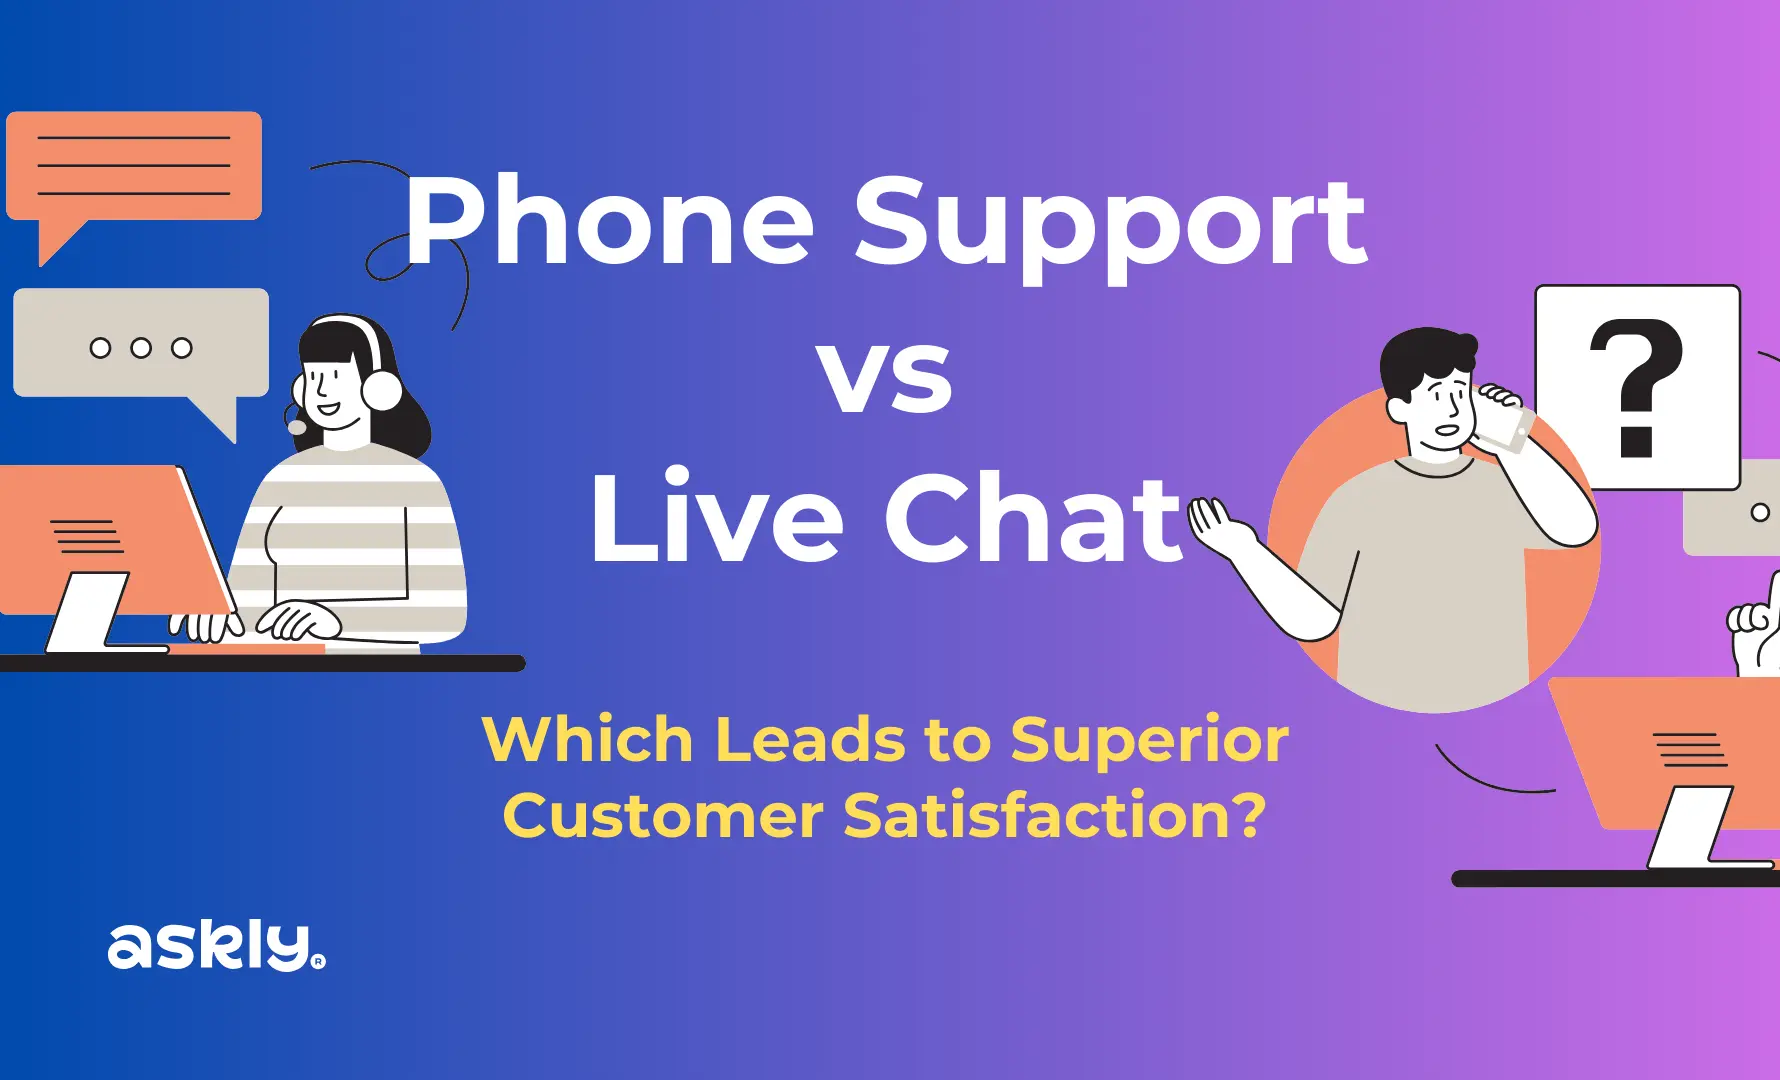 Phone Support vs Live Chat: Which Leads to Superior Customer Satisfaction?